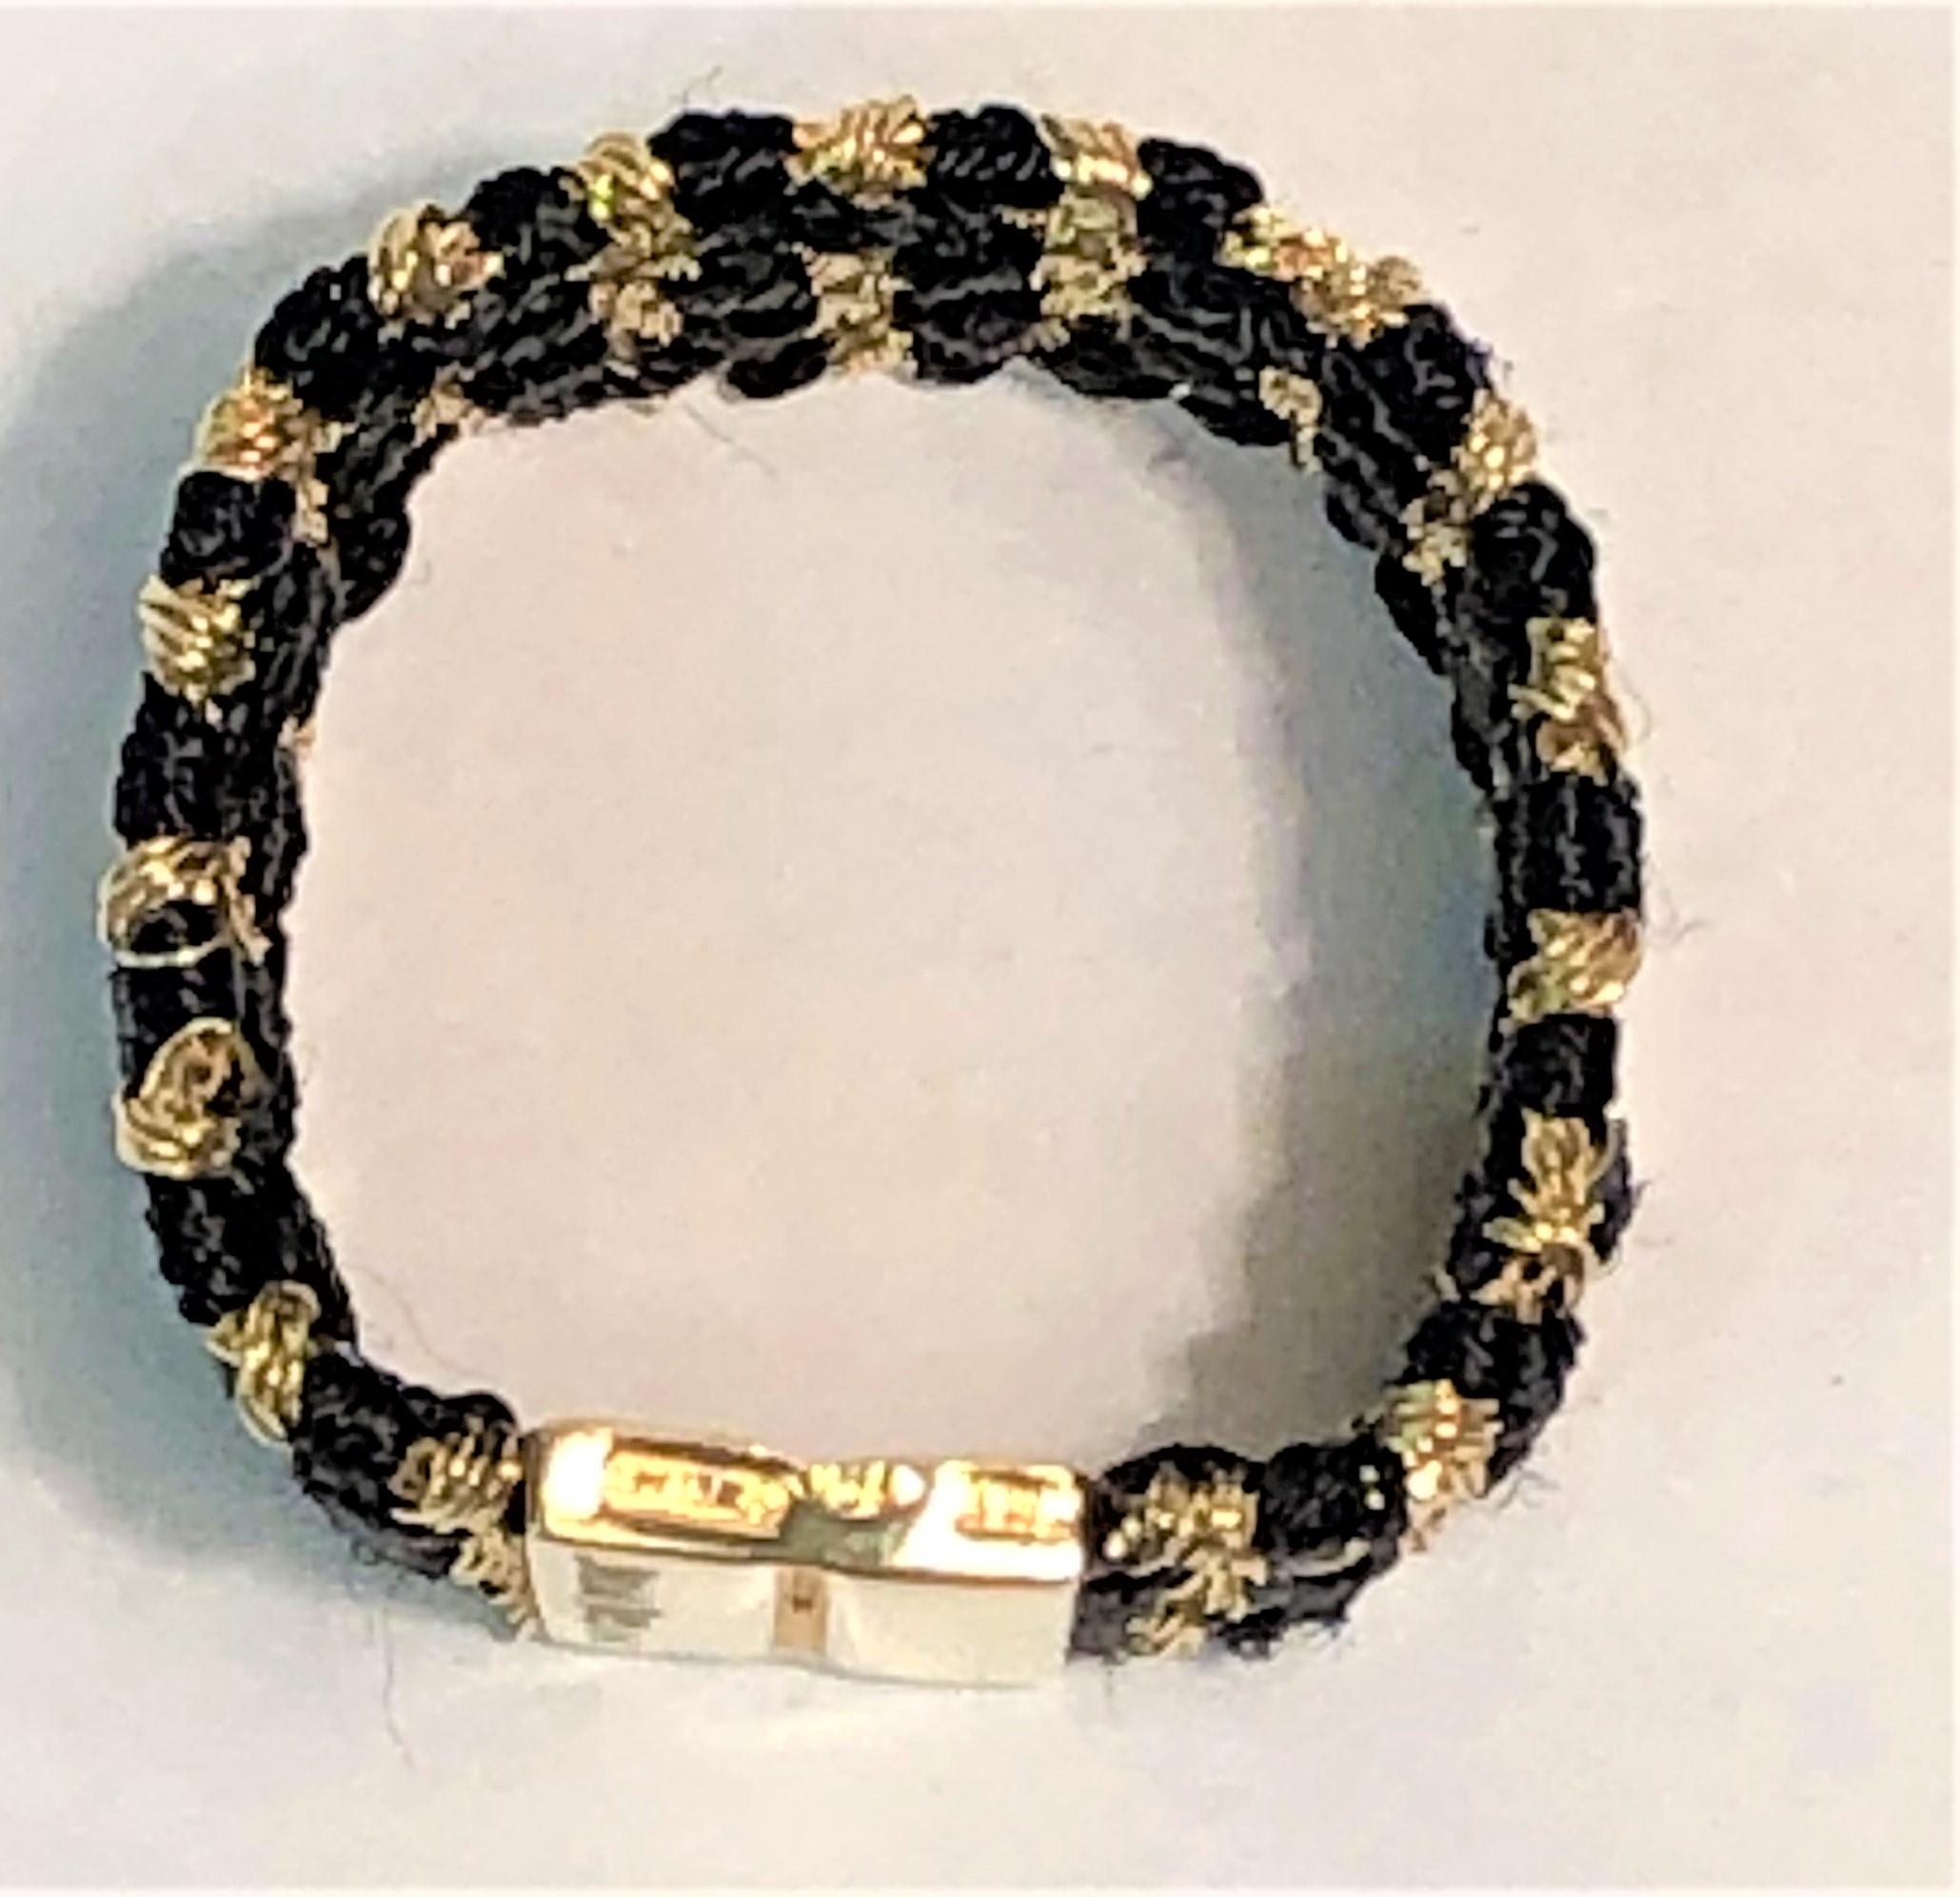 From designer Carolina Bucci, her design style really shows in this beautiful ring.
Black silk strands woven with 18 karat yellow gold strands.
Bottom of ring has a solid 18 karat yellow gold accent with Carolina Bucci's signature and 